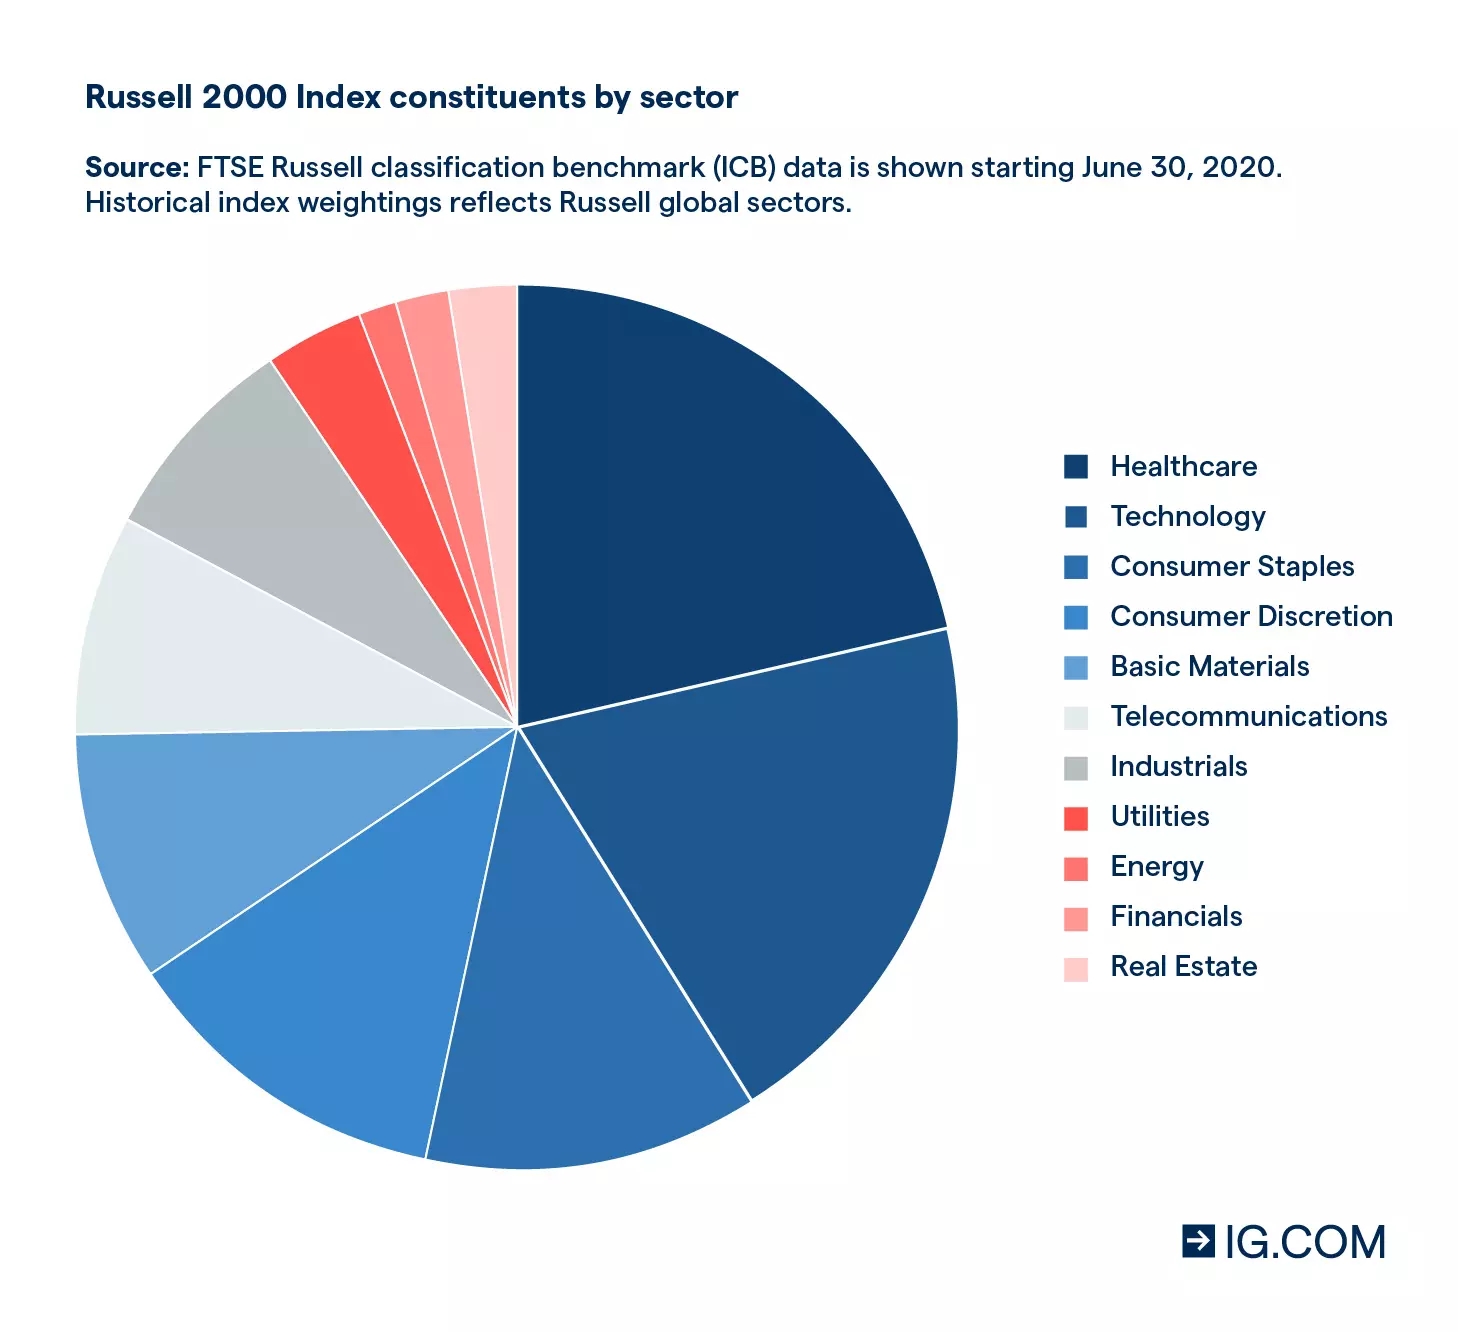 PIE CHART IMAGE OF RUSSELL 2000 INDEX’S CONSTITUENT SECTORS BY ORDER OF WEIGHTING AS OF JUNE 2020 (OR AS RECENT AS POSSIBLE)